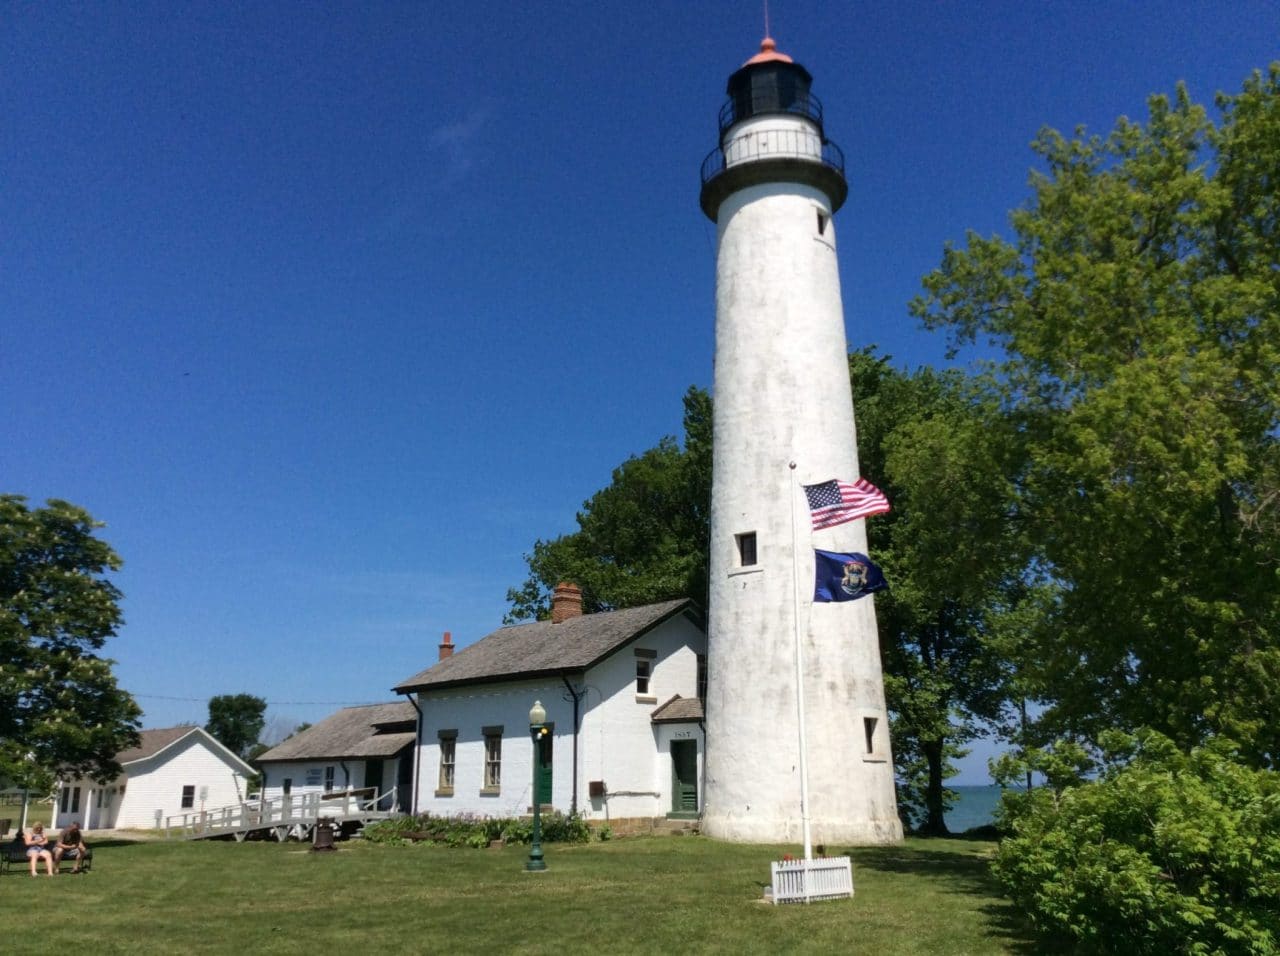 Live, Explore, and Volunteer As an Assistant Lighthouse keeper In One of Michigan’s Historic Lighthouses